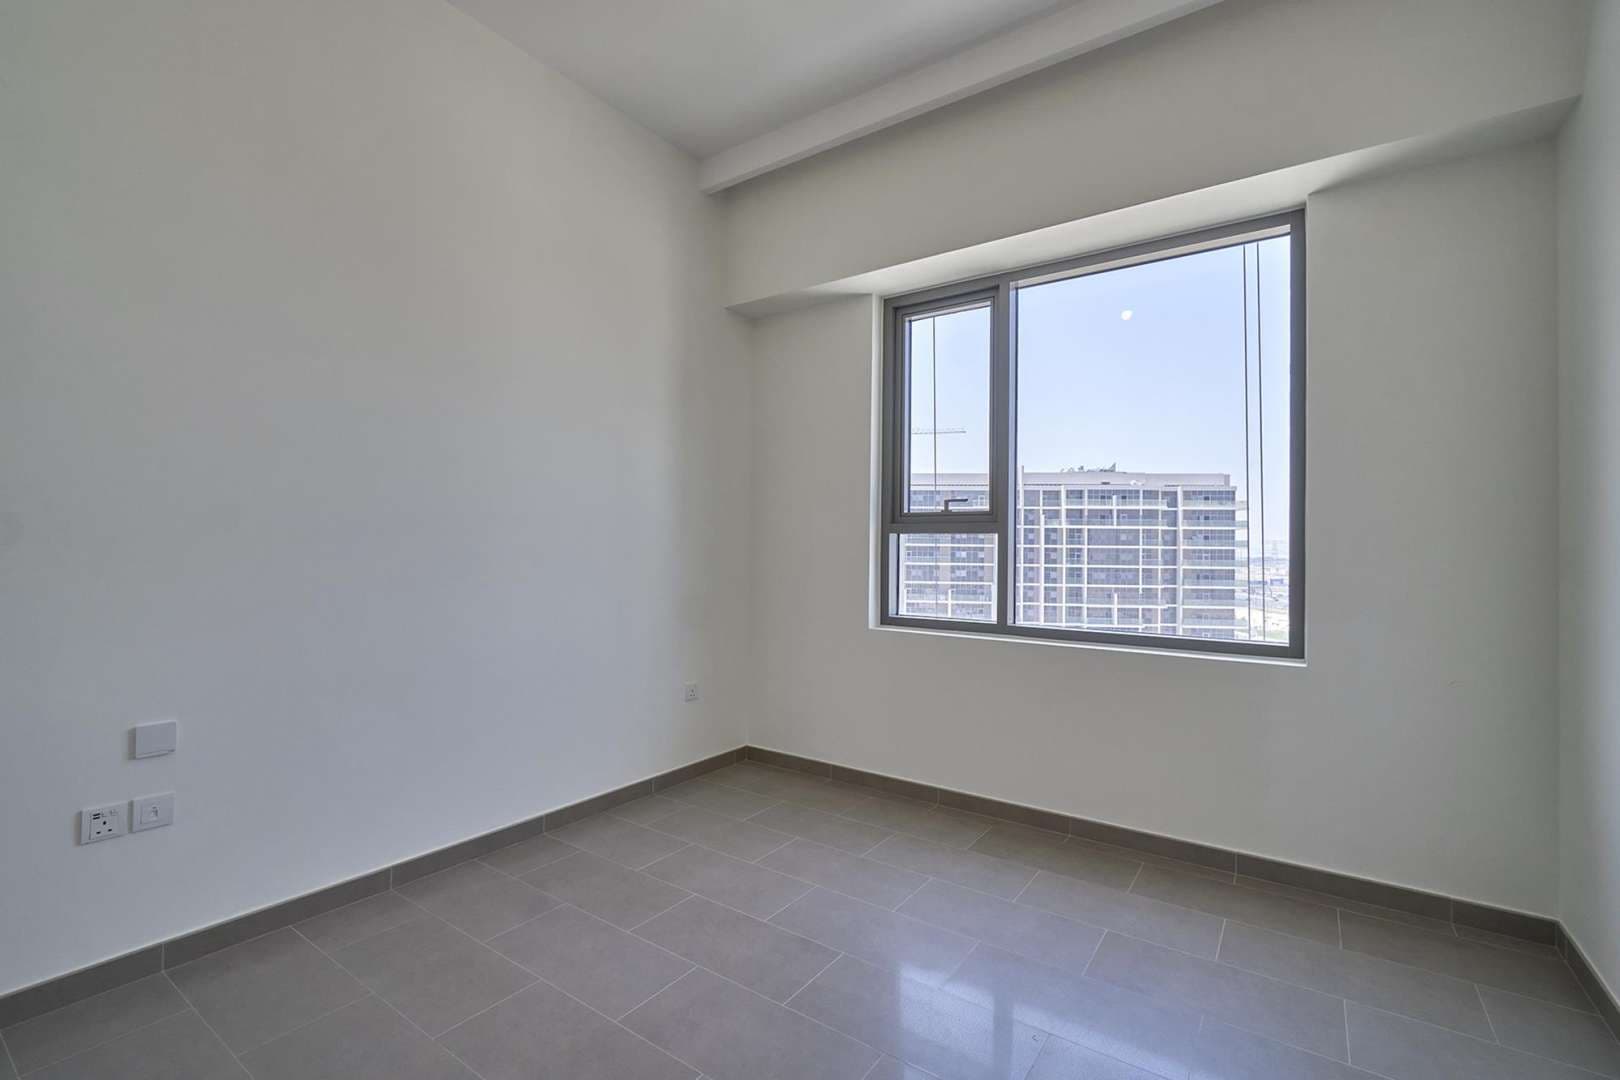 2 Bedroom Apartment For Sale Park Heights Lp08351 1befcfe0d77e1800.jpg